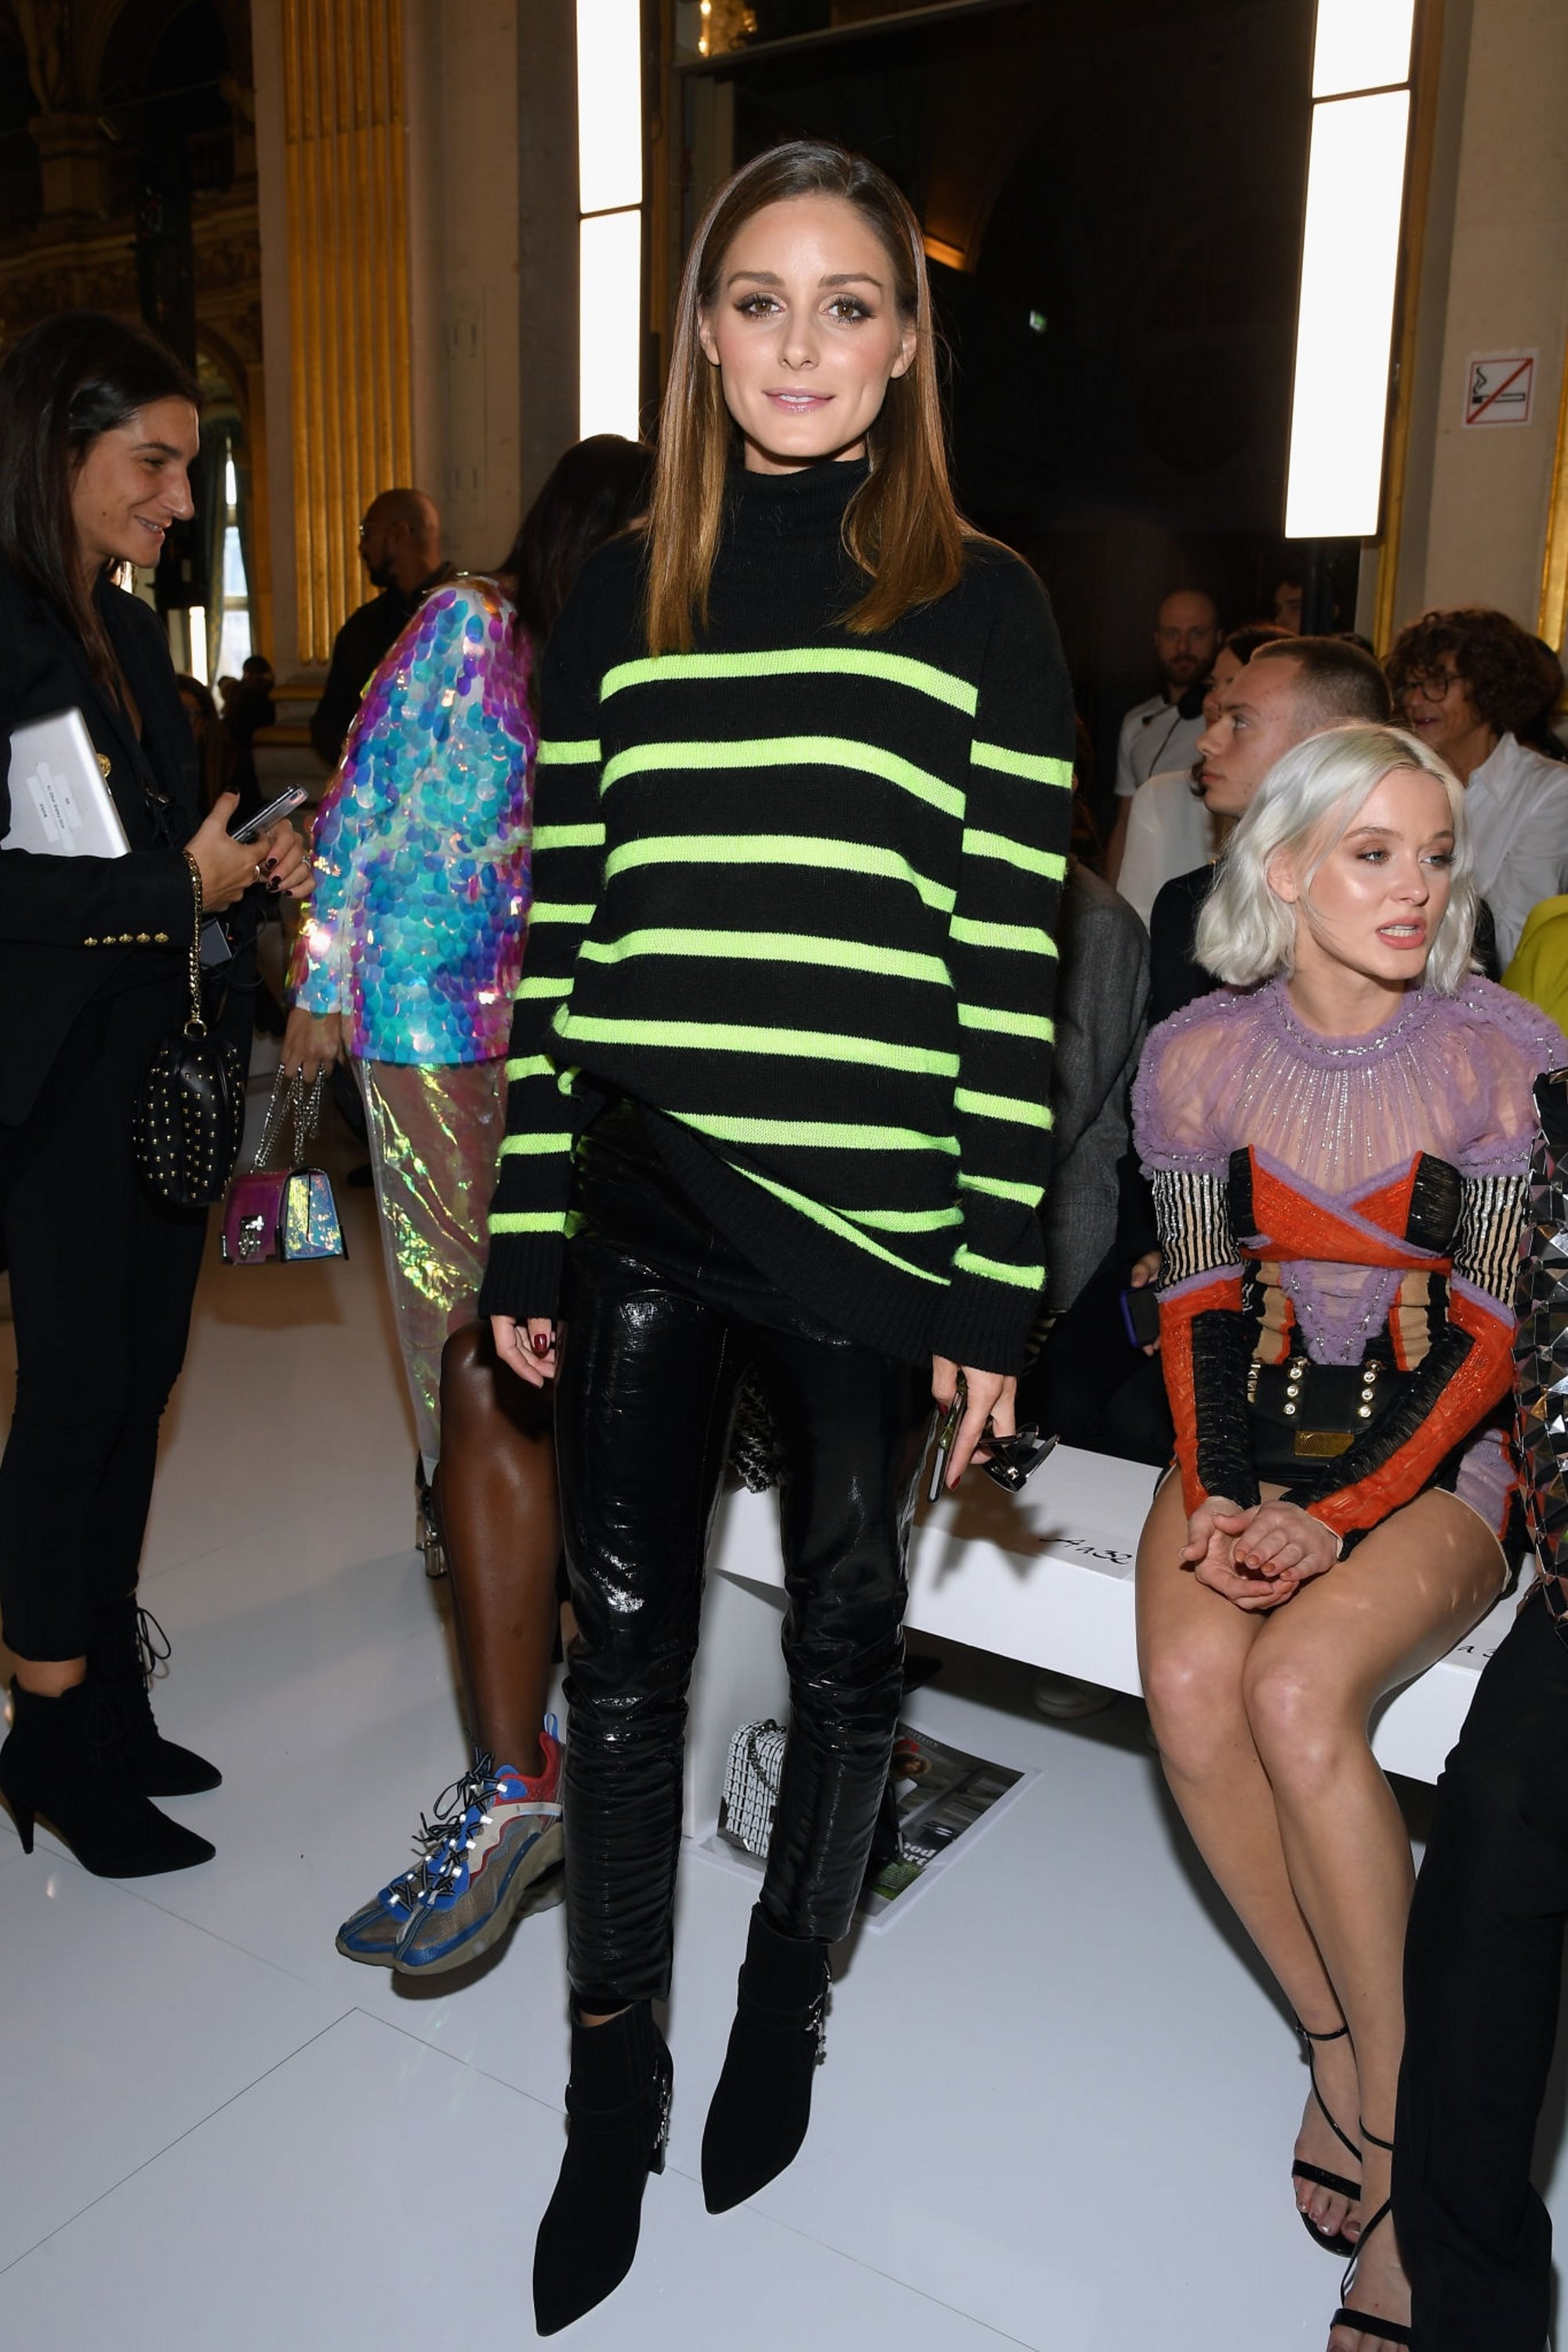 Olivia Palermo attends the Balmain show